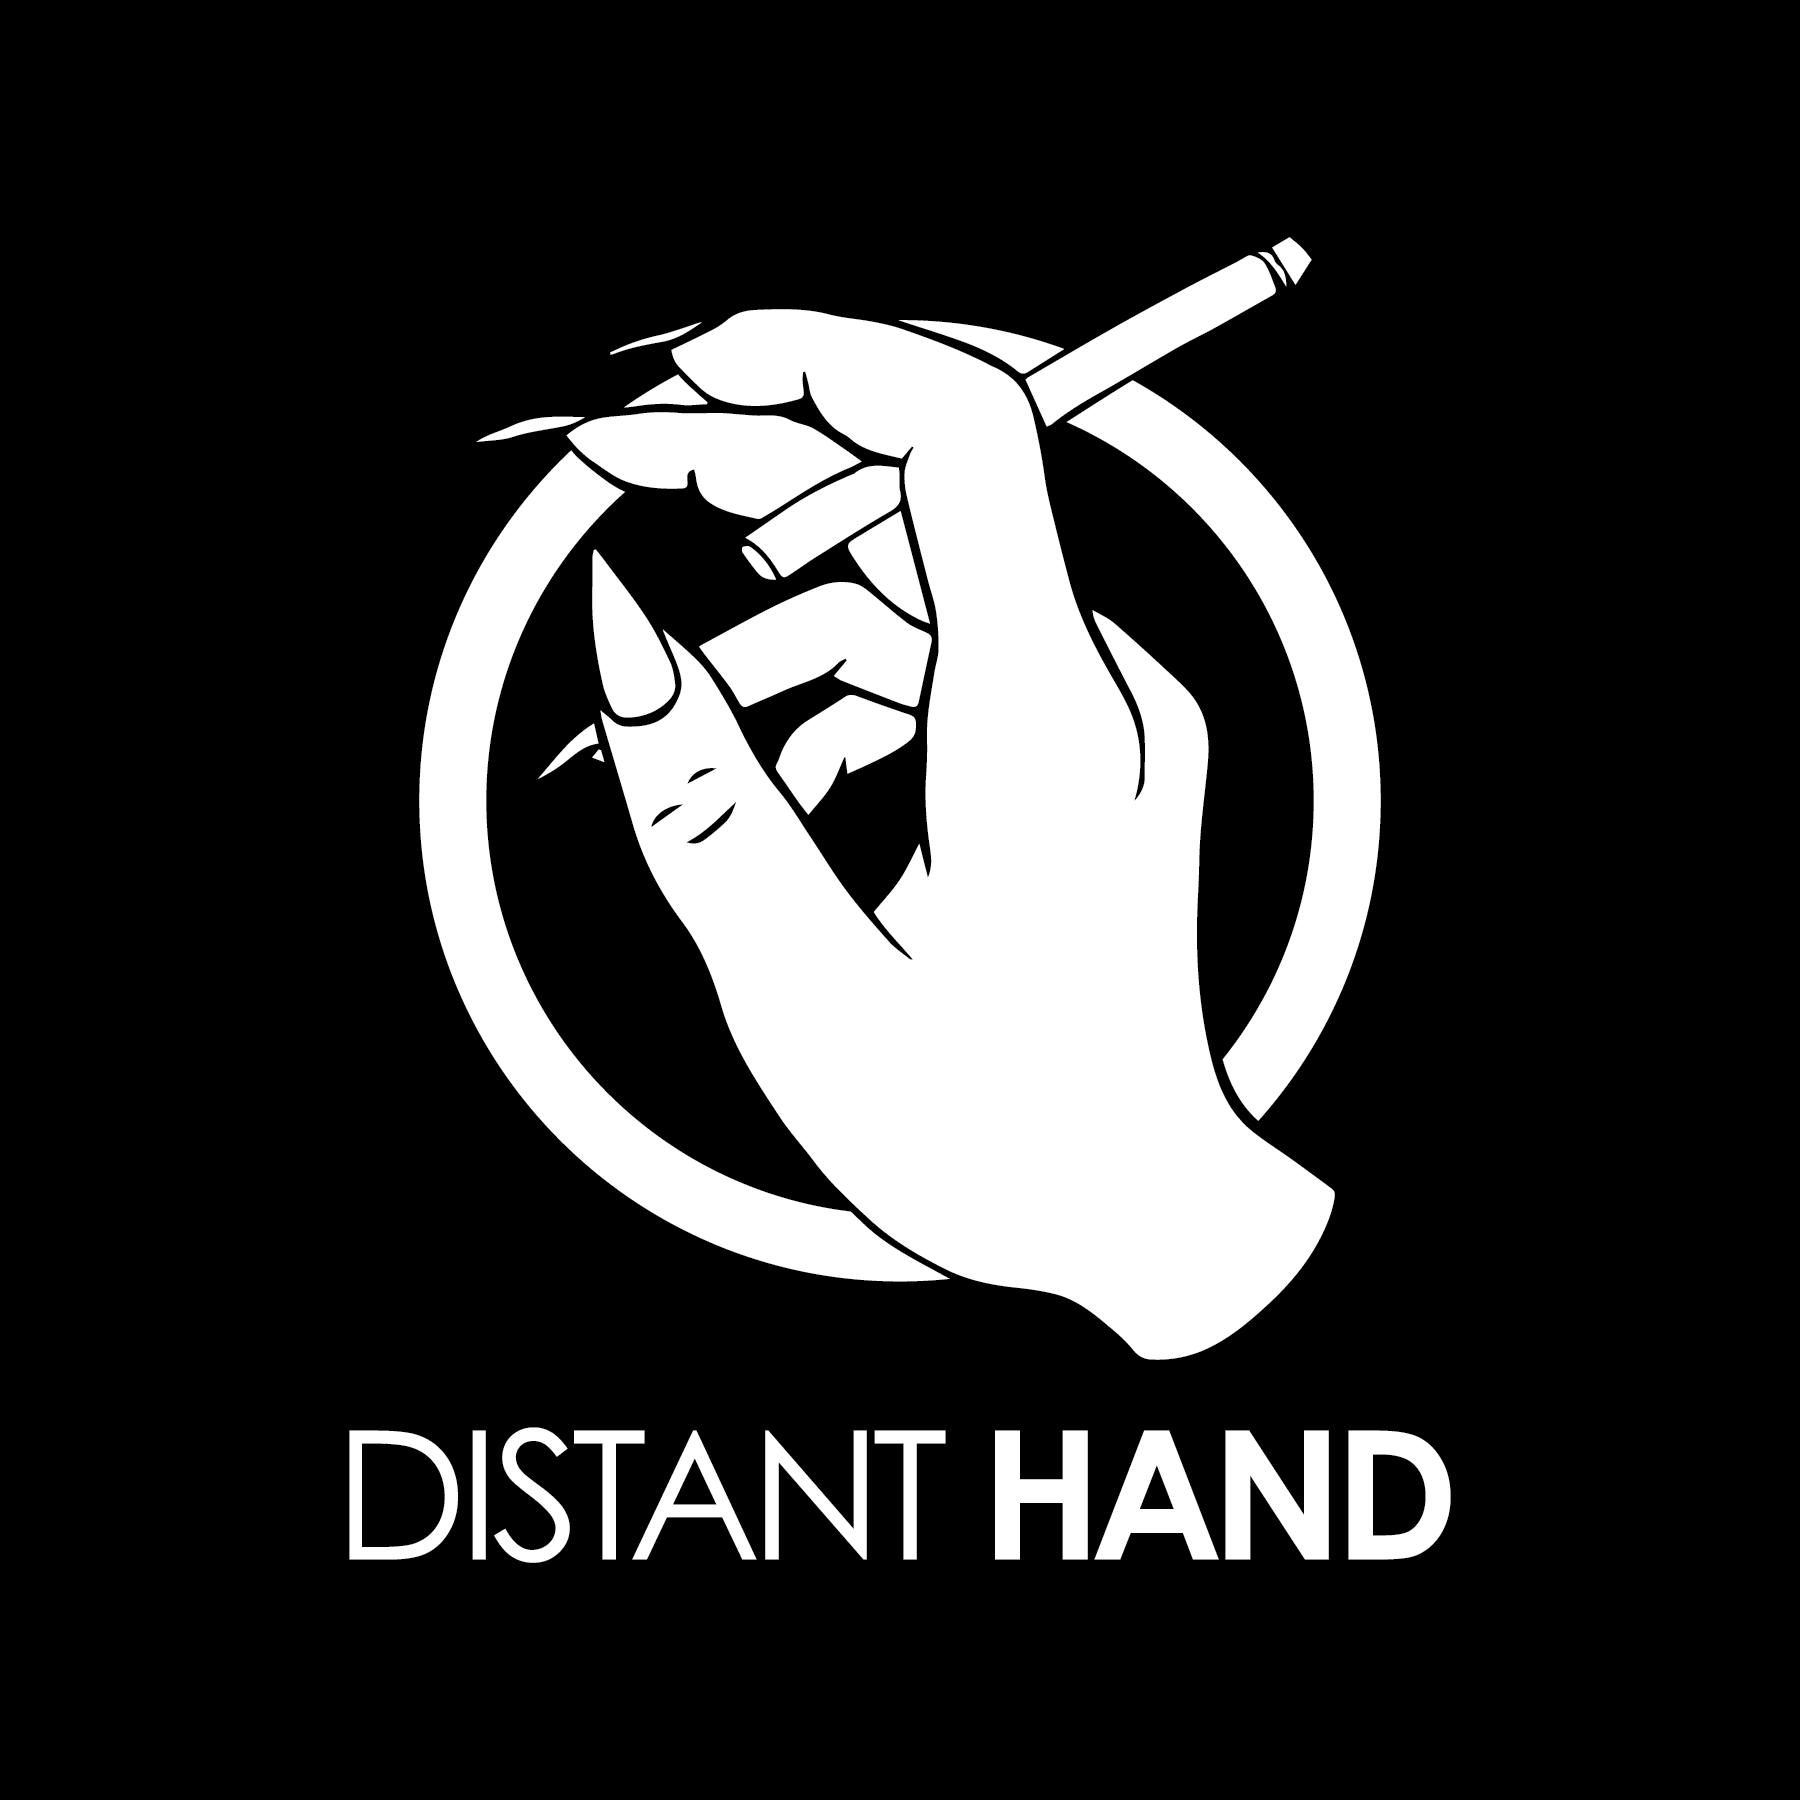 What Is DISTANT HAND?